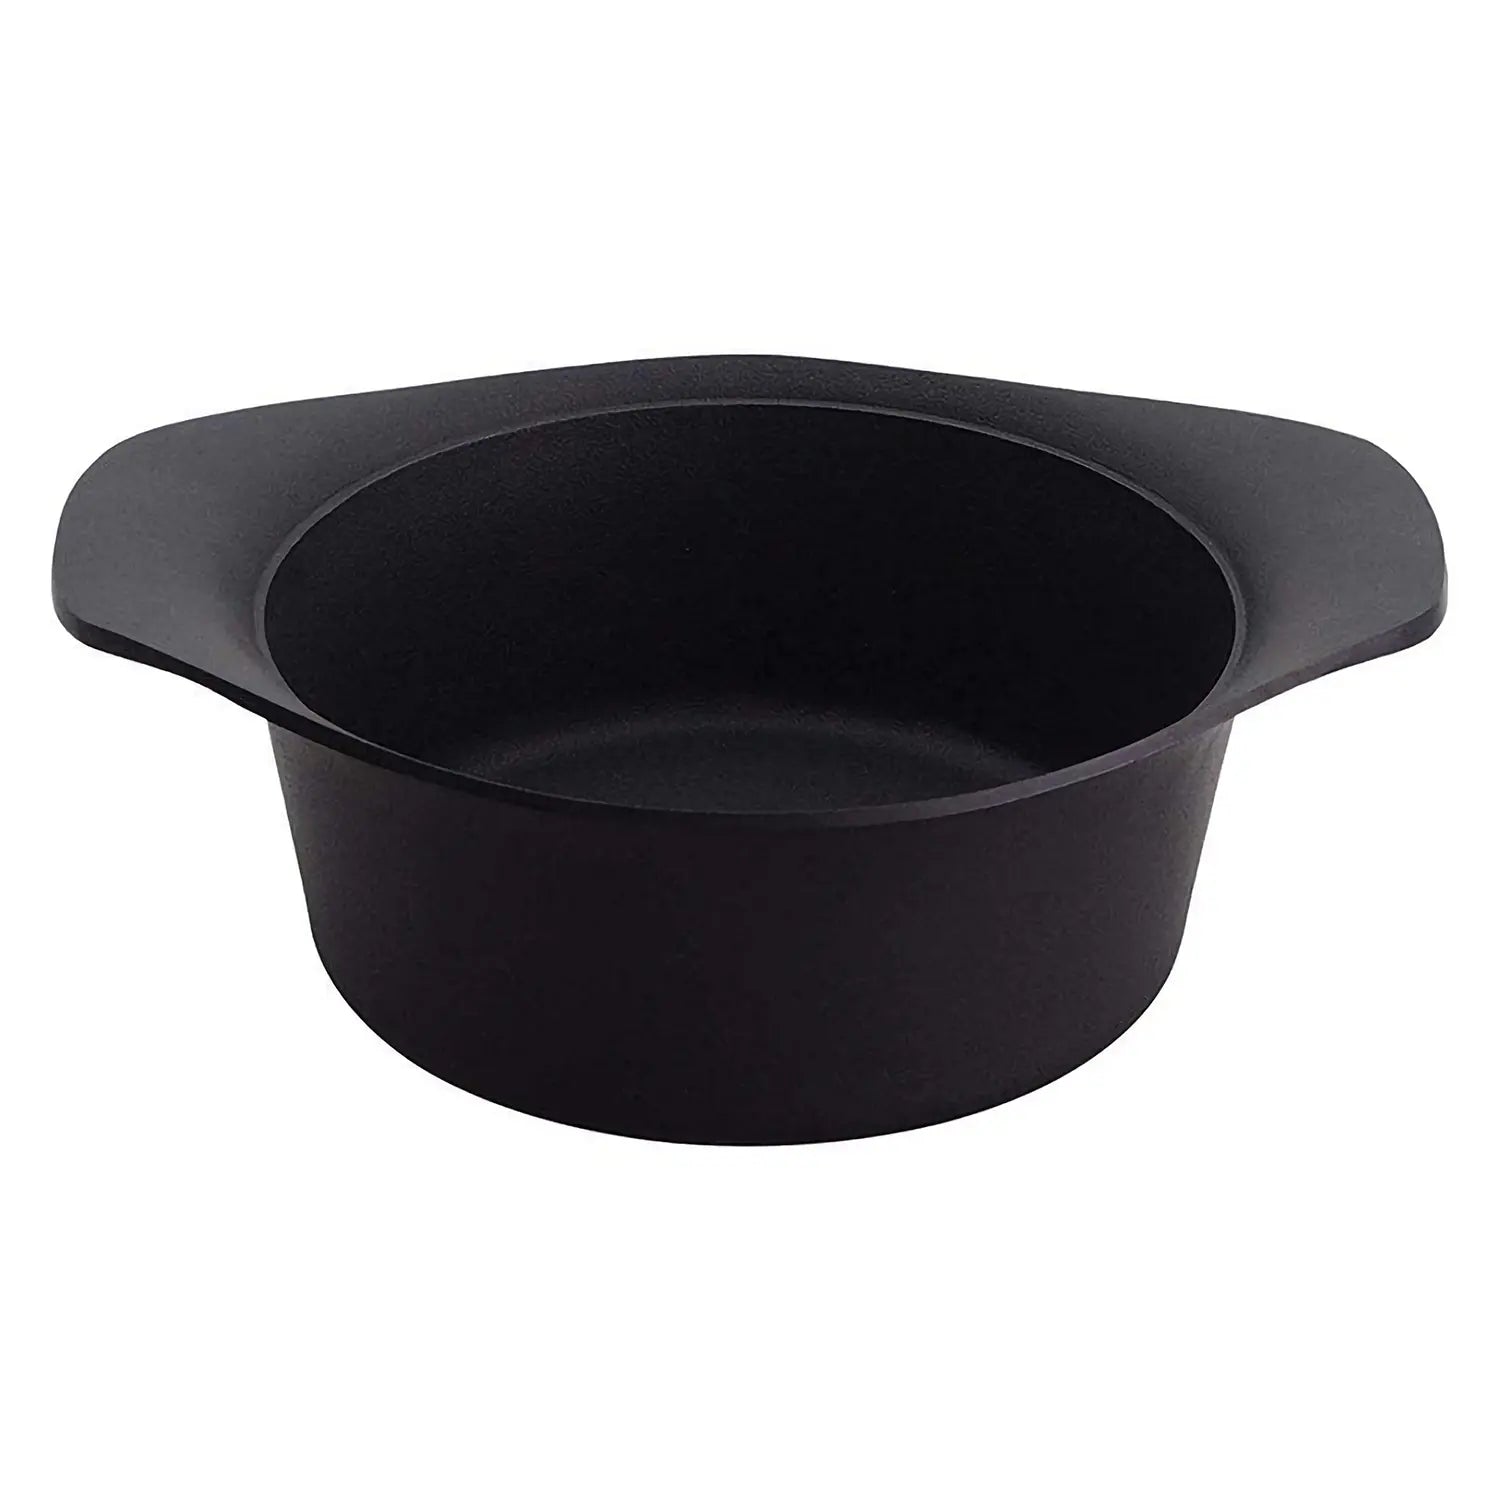 https://cdn.shopify.com/s/files/1/1610/3863/products/SoriYanagiCastIronInductionDeepCasserole22cmwithStainlessSteelLid_2_1600x.webp?v=1668476850